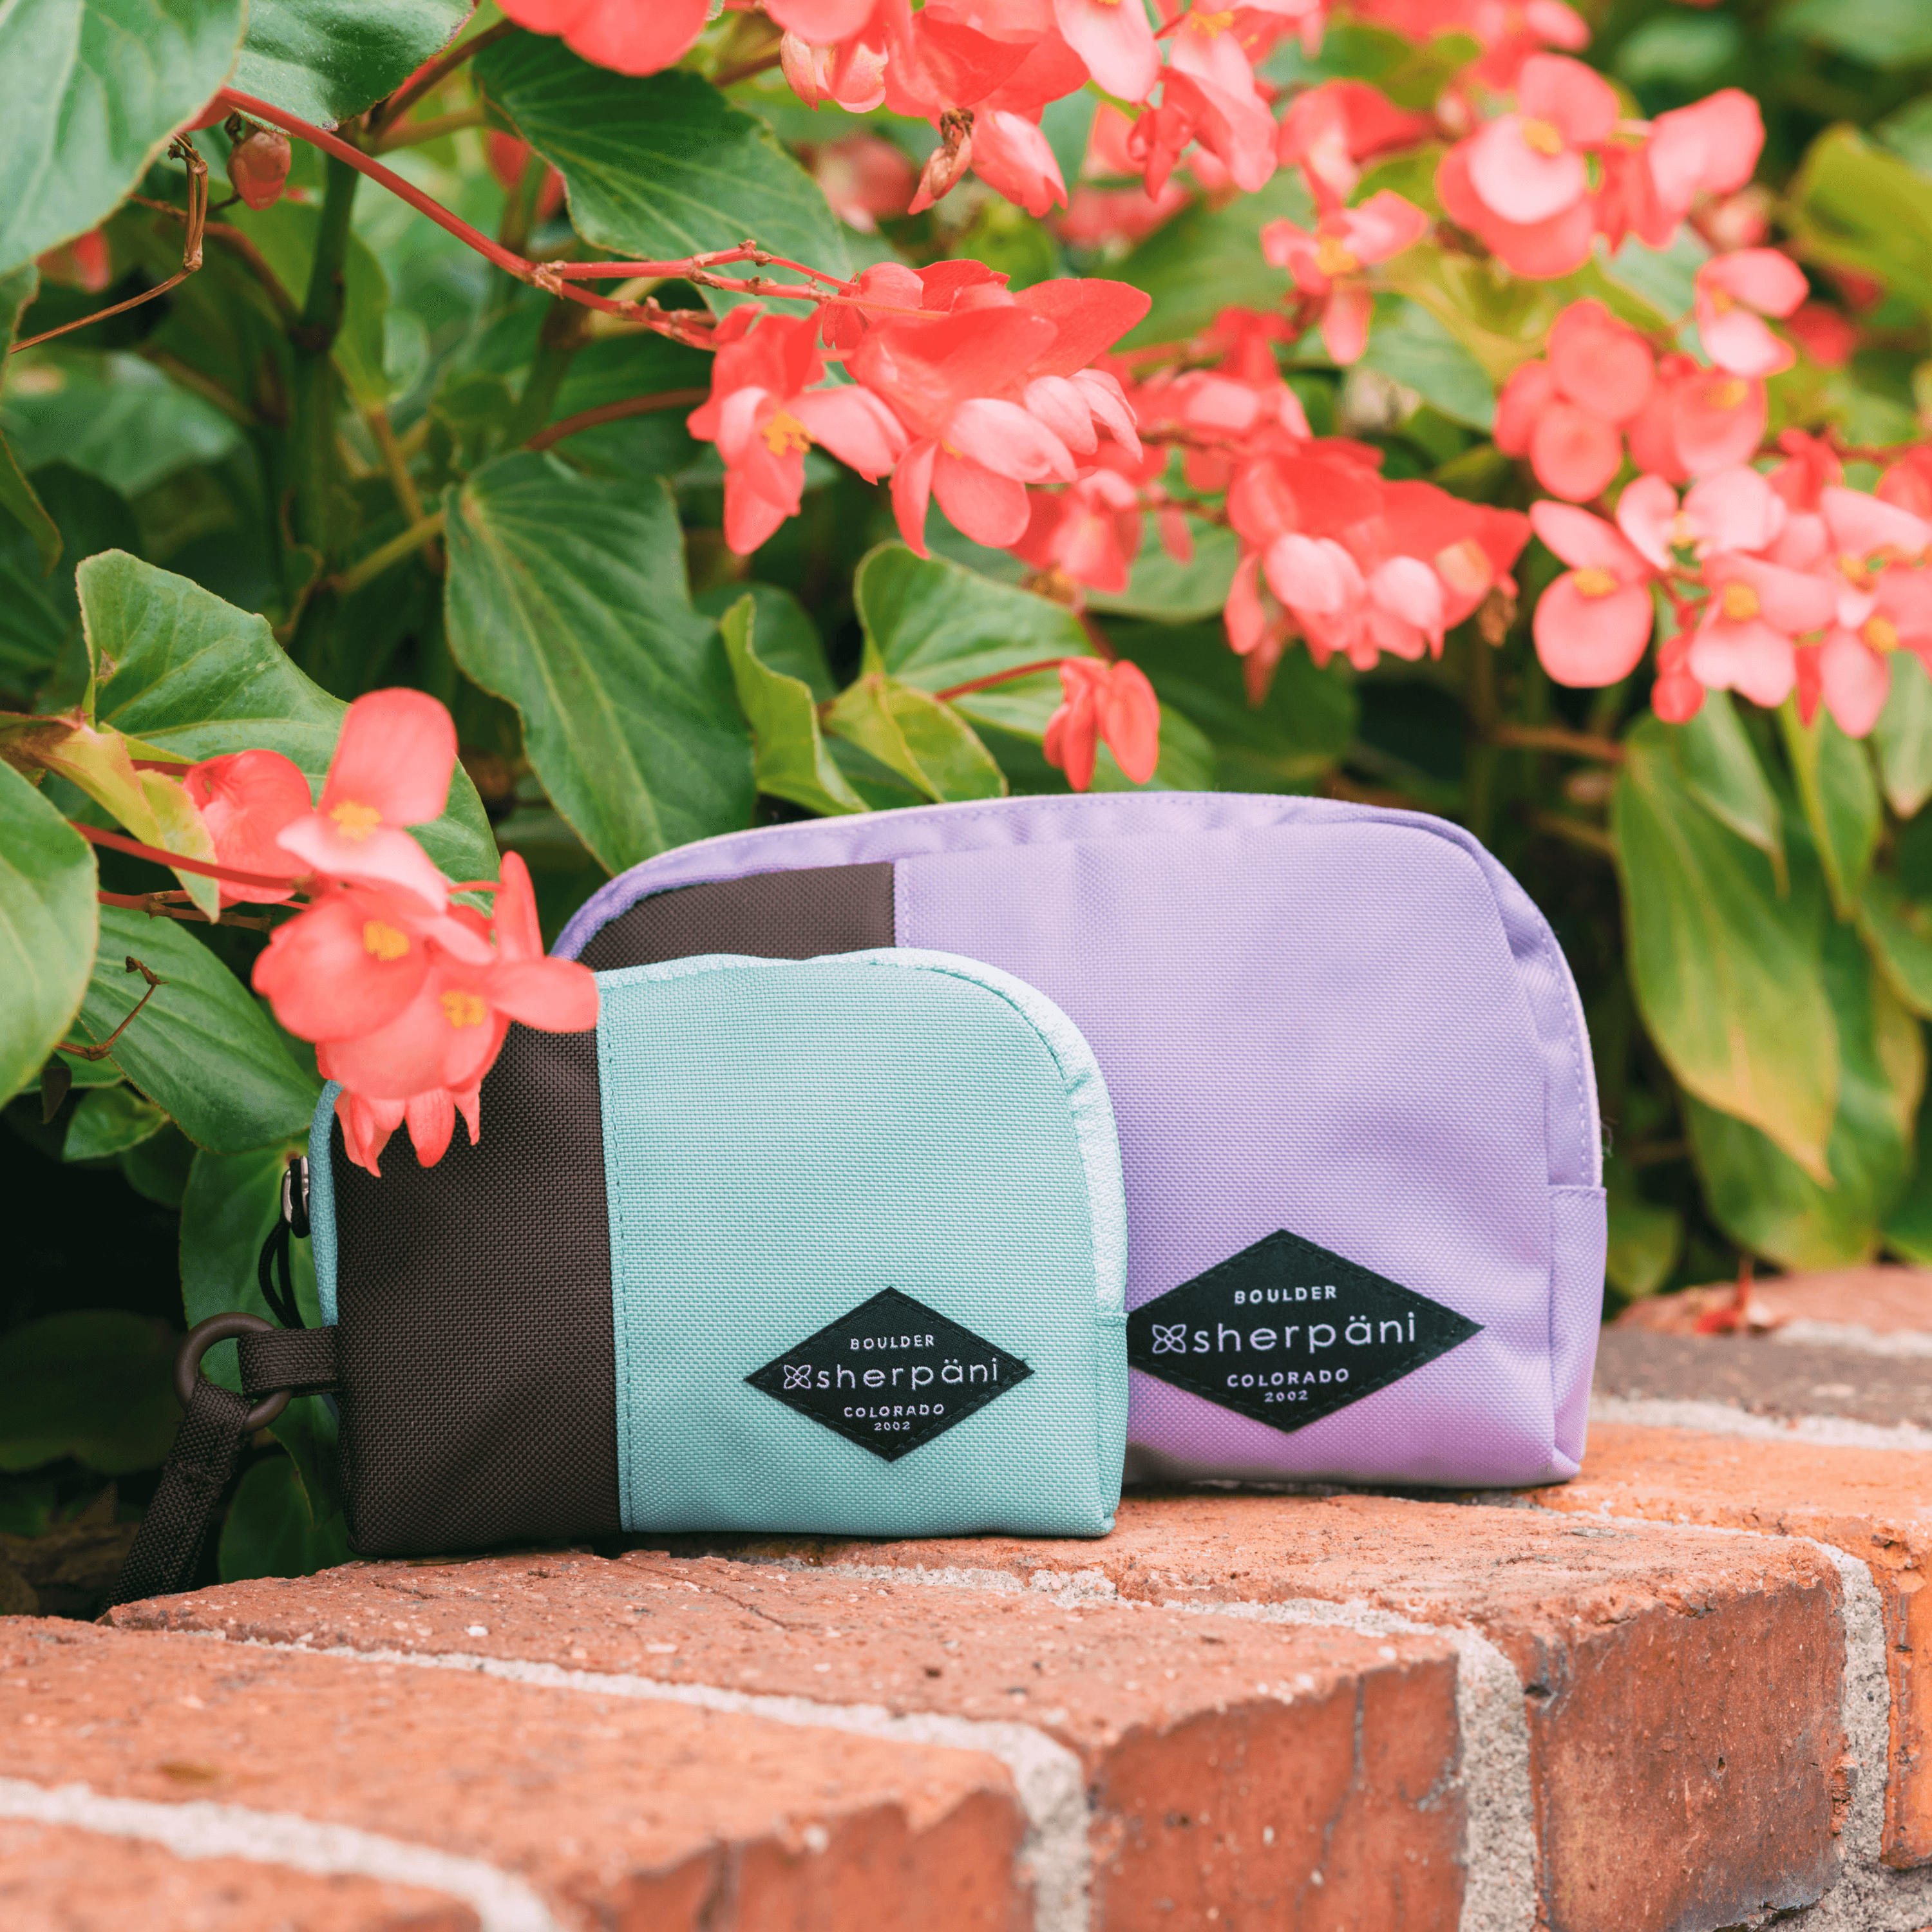 Two Sherpani travel accessories sit on a brick ledge outside under some flowers. A medium size Jolie in Lavender and small size Jolie in Seagreen.